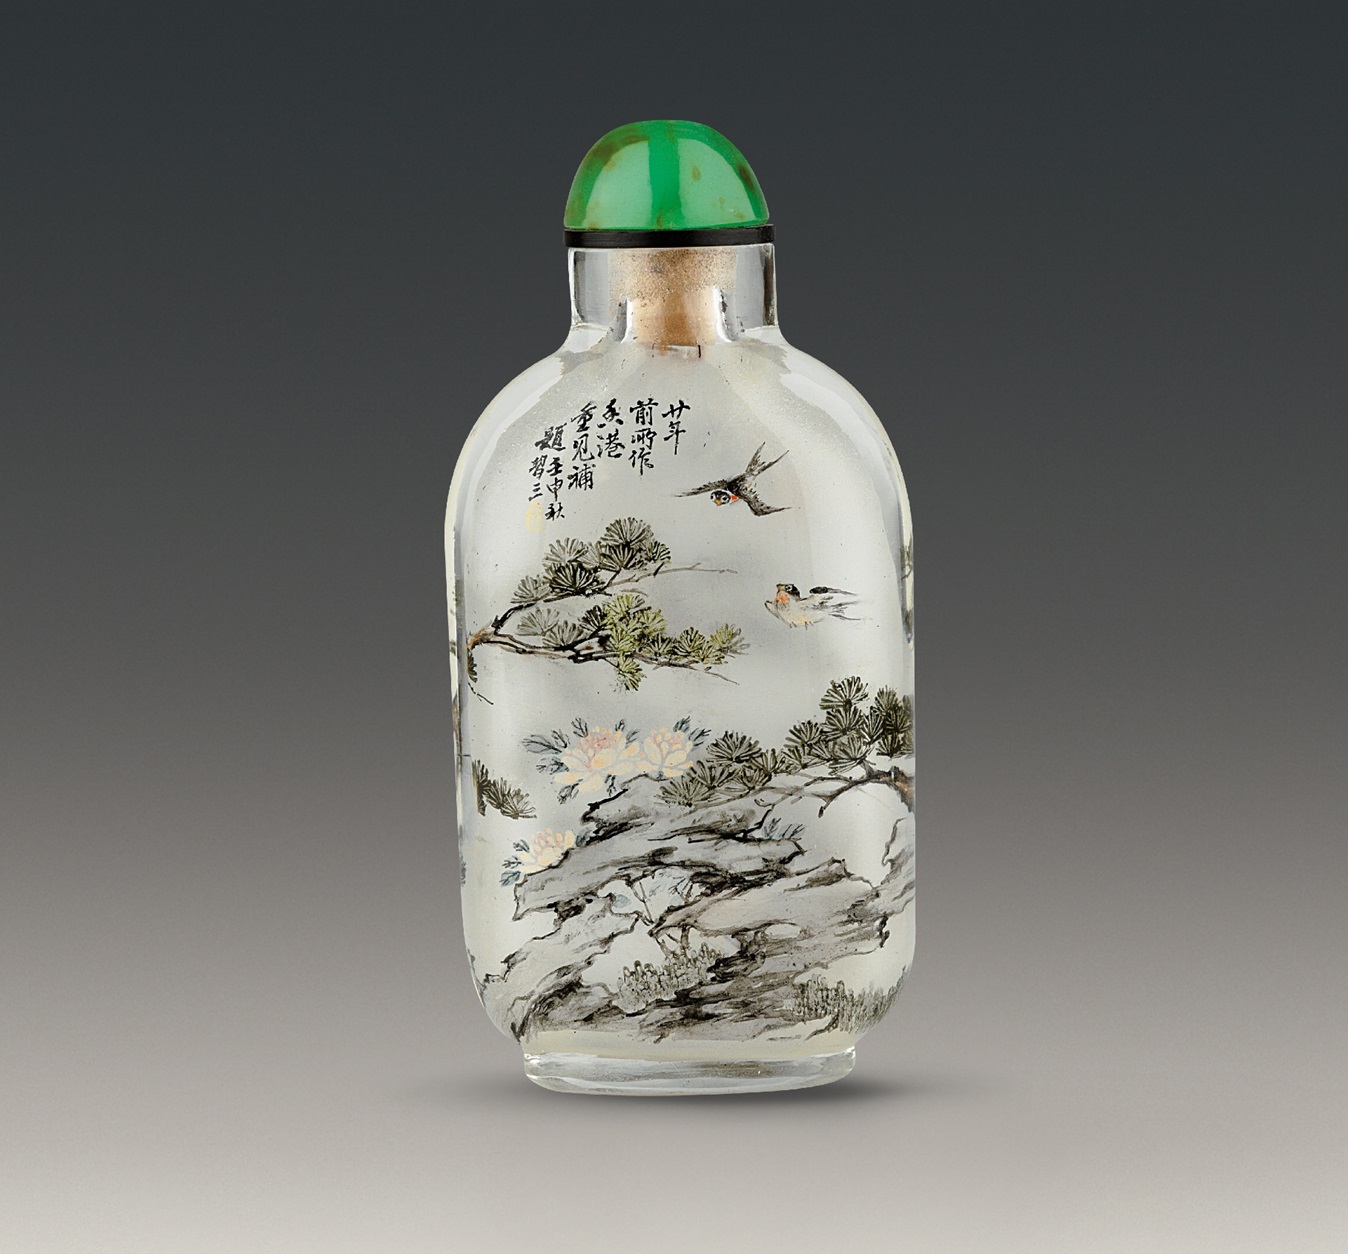 Glass snuff bottle inside-painted with flowers and birds design  